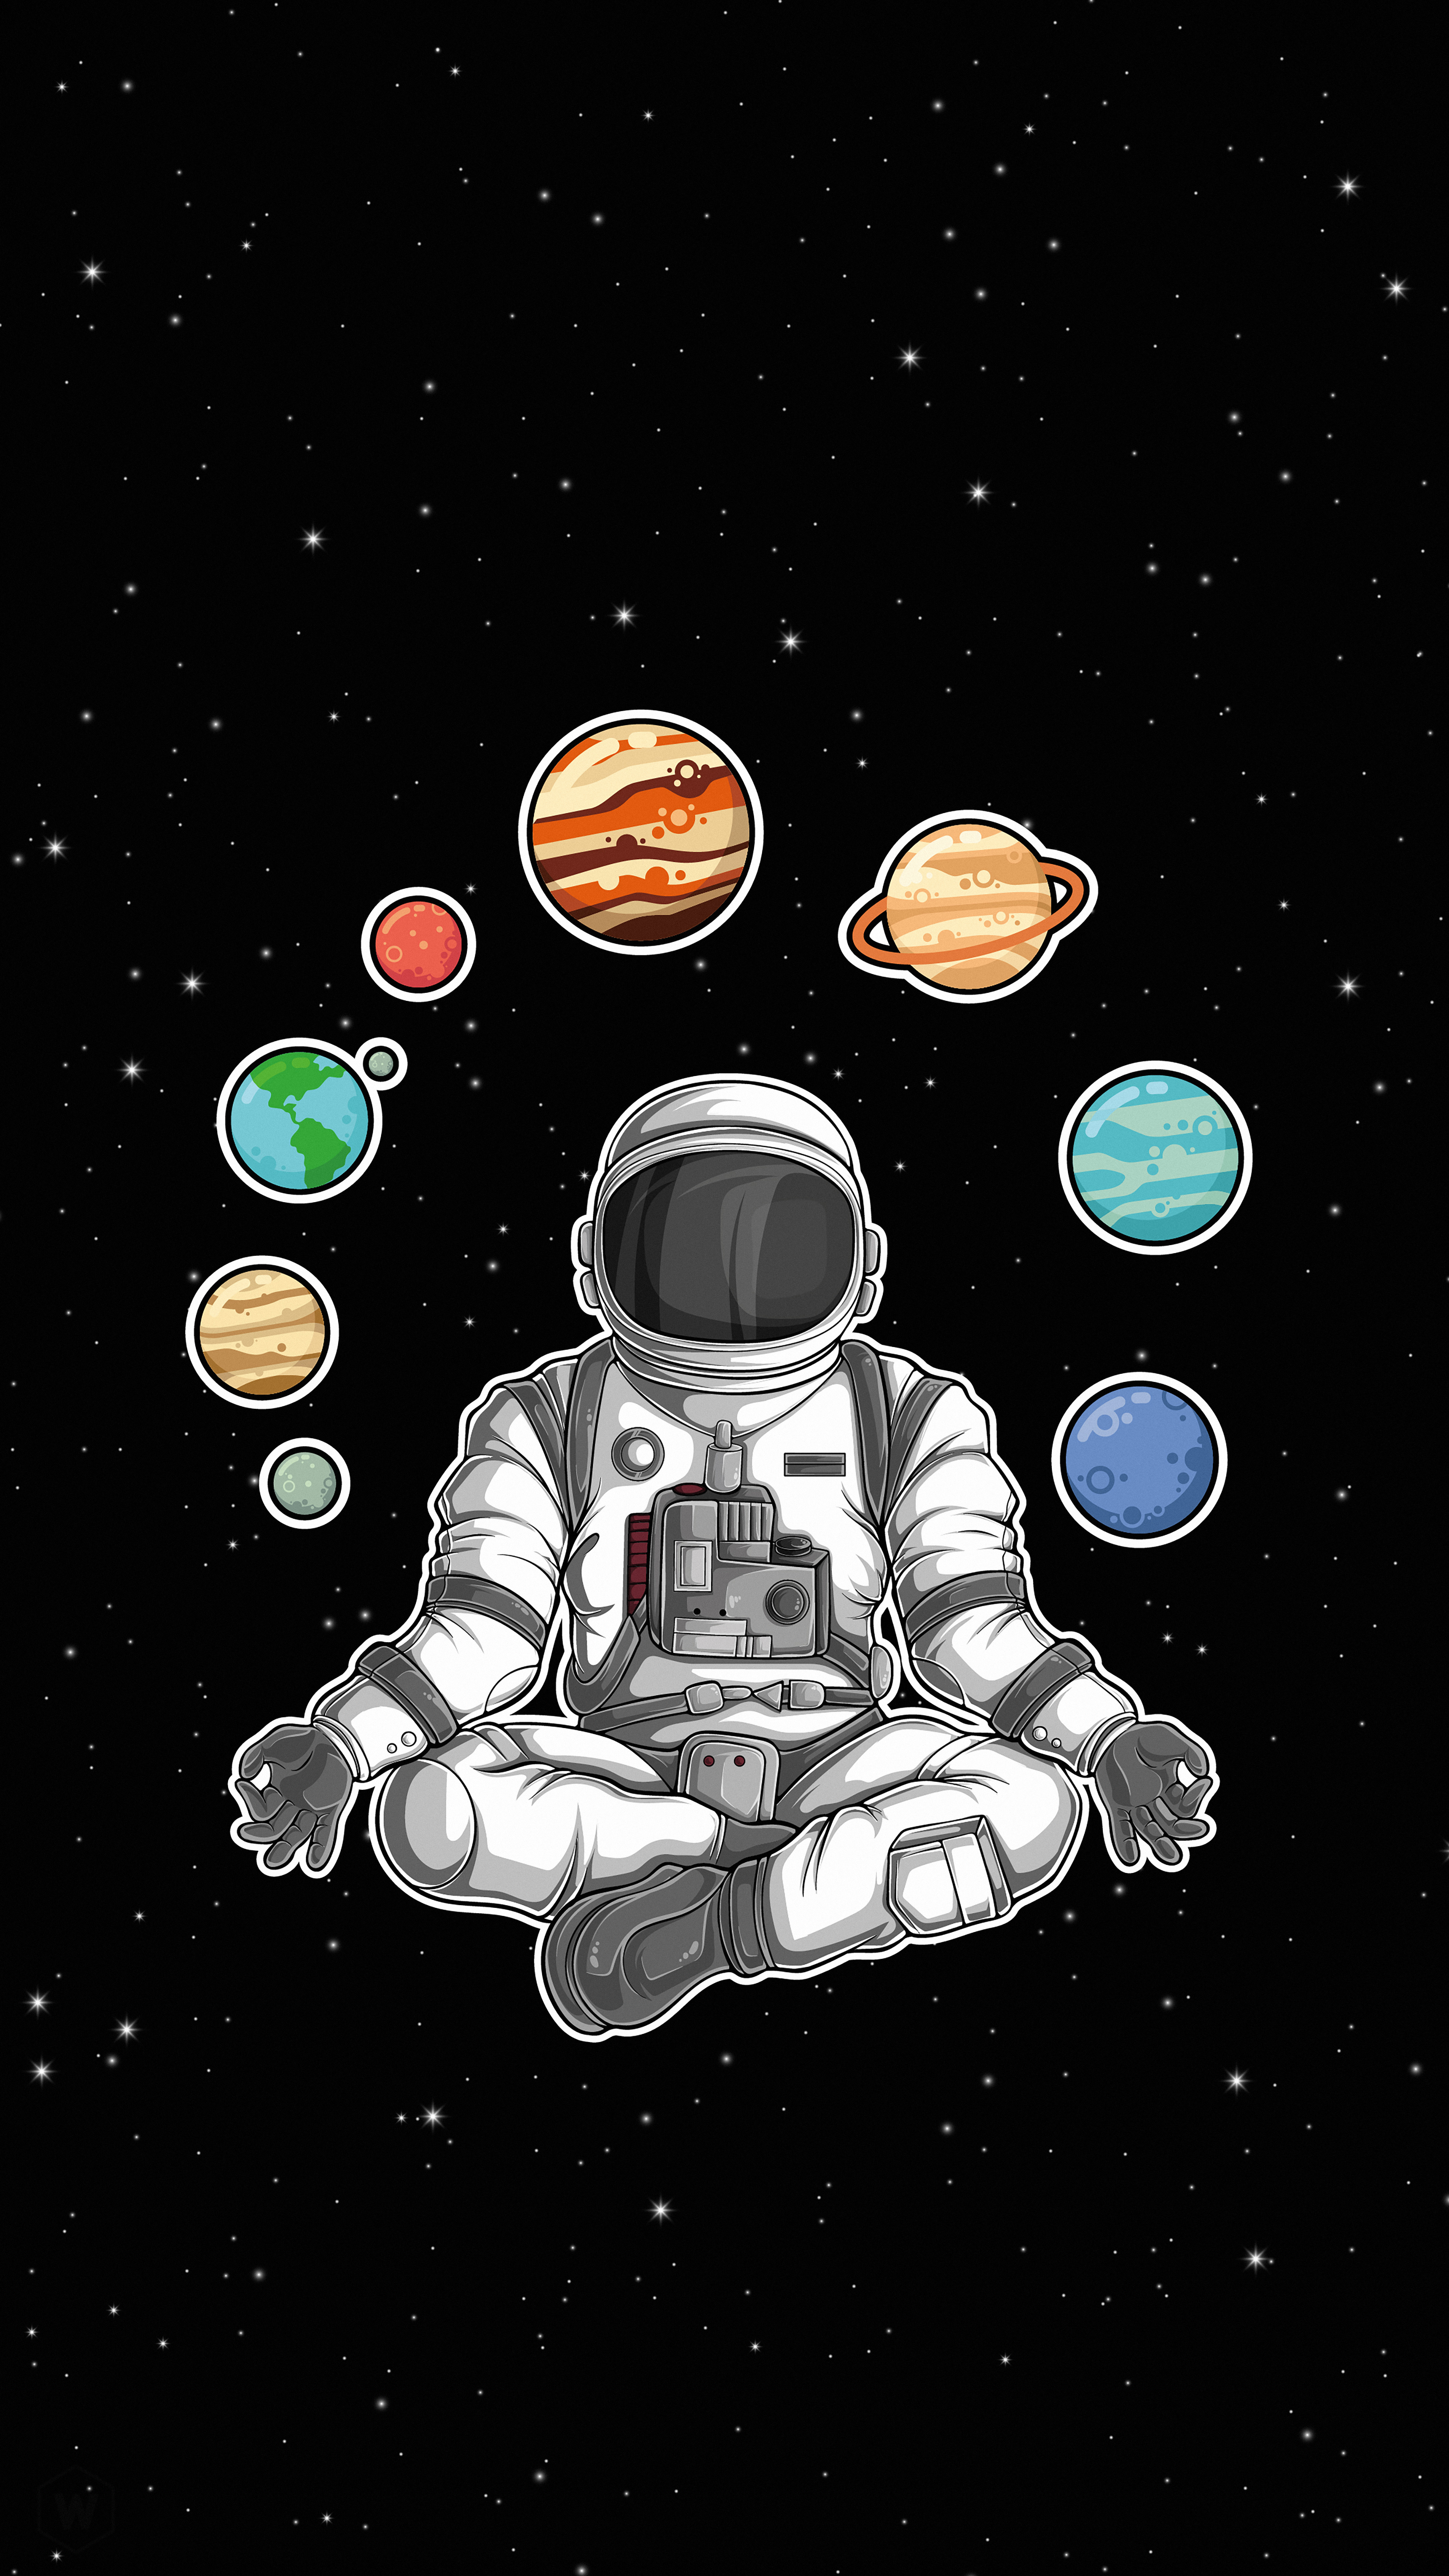 Astronaut Wallpapers 43 images inside